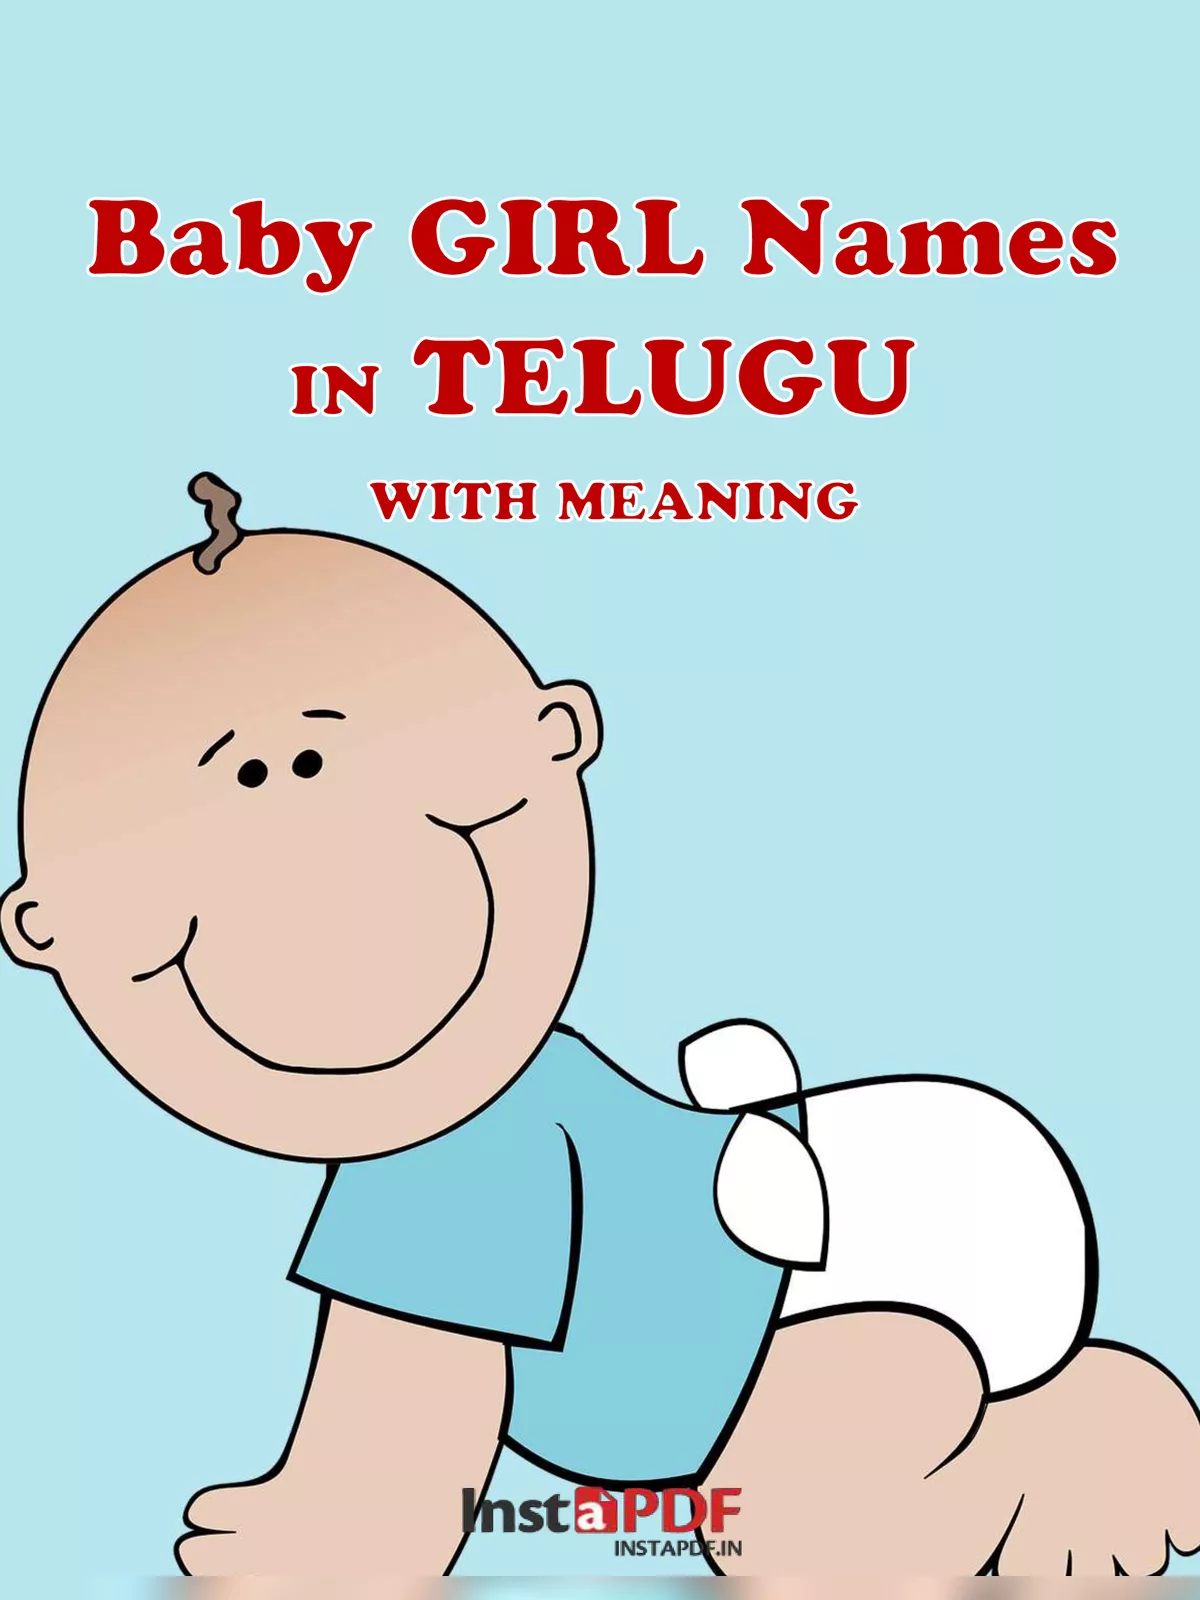 Baby Girl Names in Telugu with Meaning